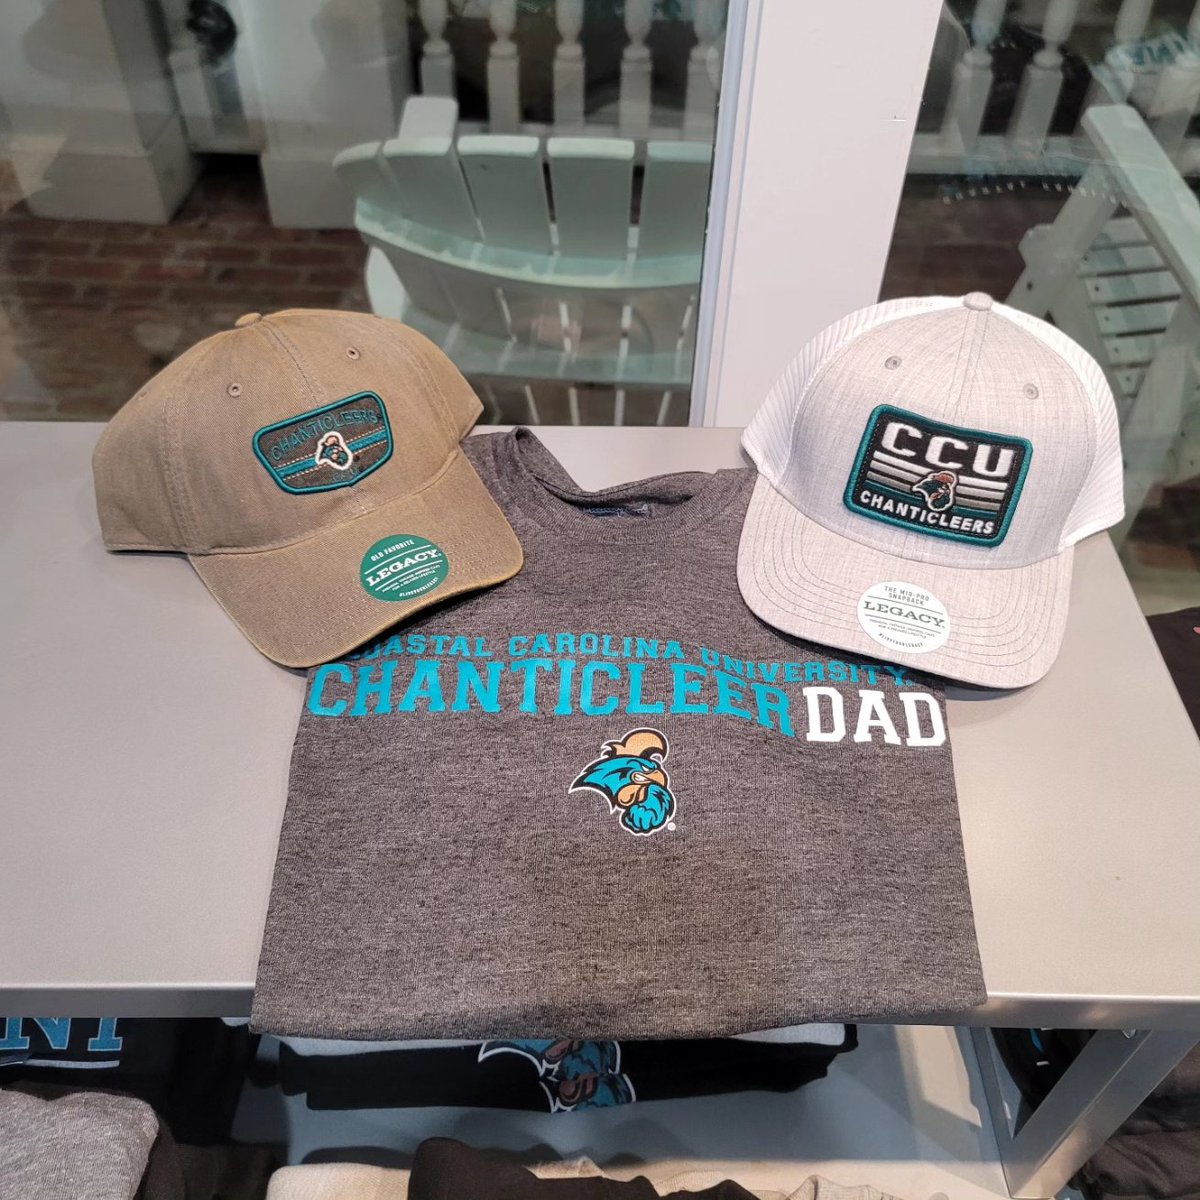 Looking to get Dad decked out in Teal this Father's Day? Stop by for the best selection of Chanticleer merchandise on the Grand Stand. We are open until 11pm! #tealnation #chantsup #ccu